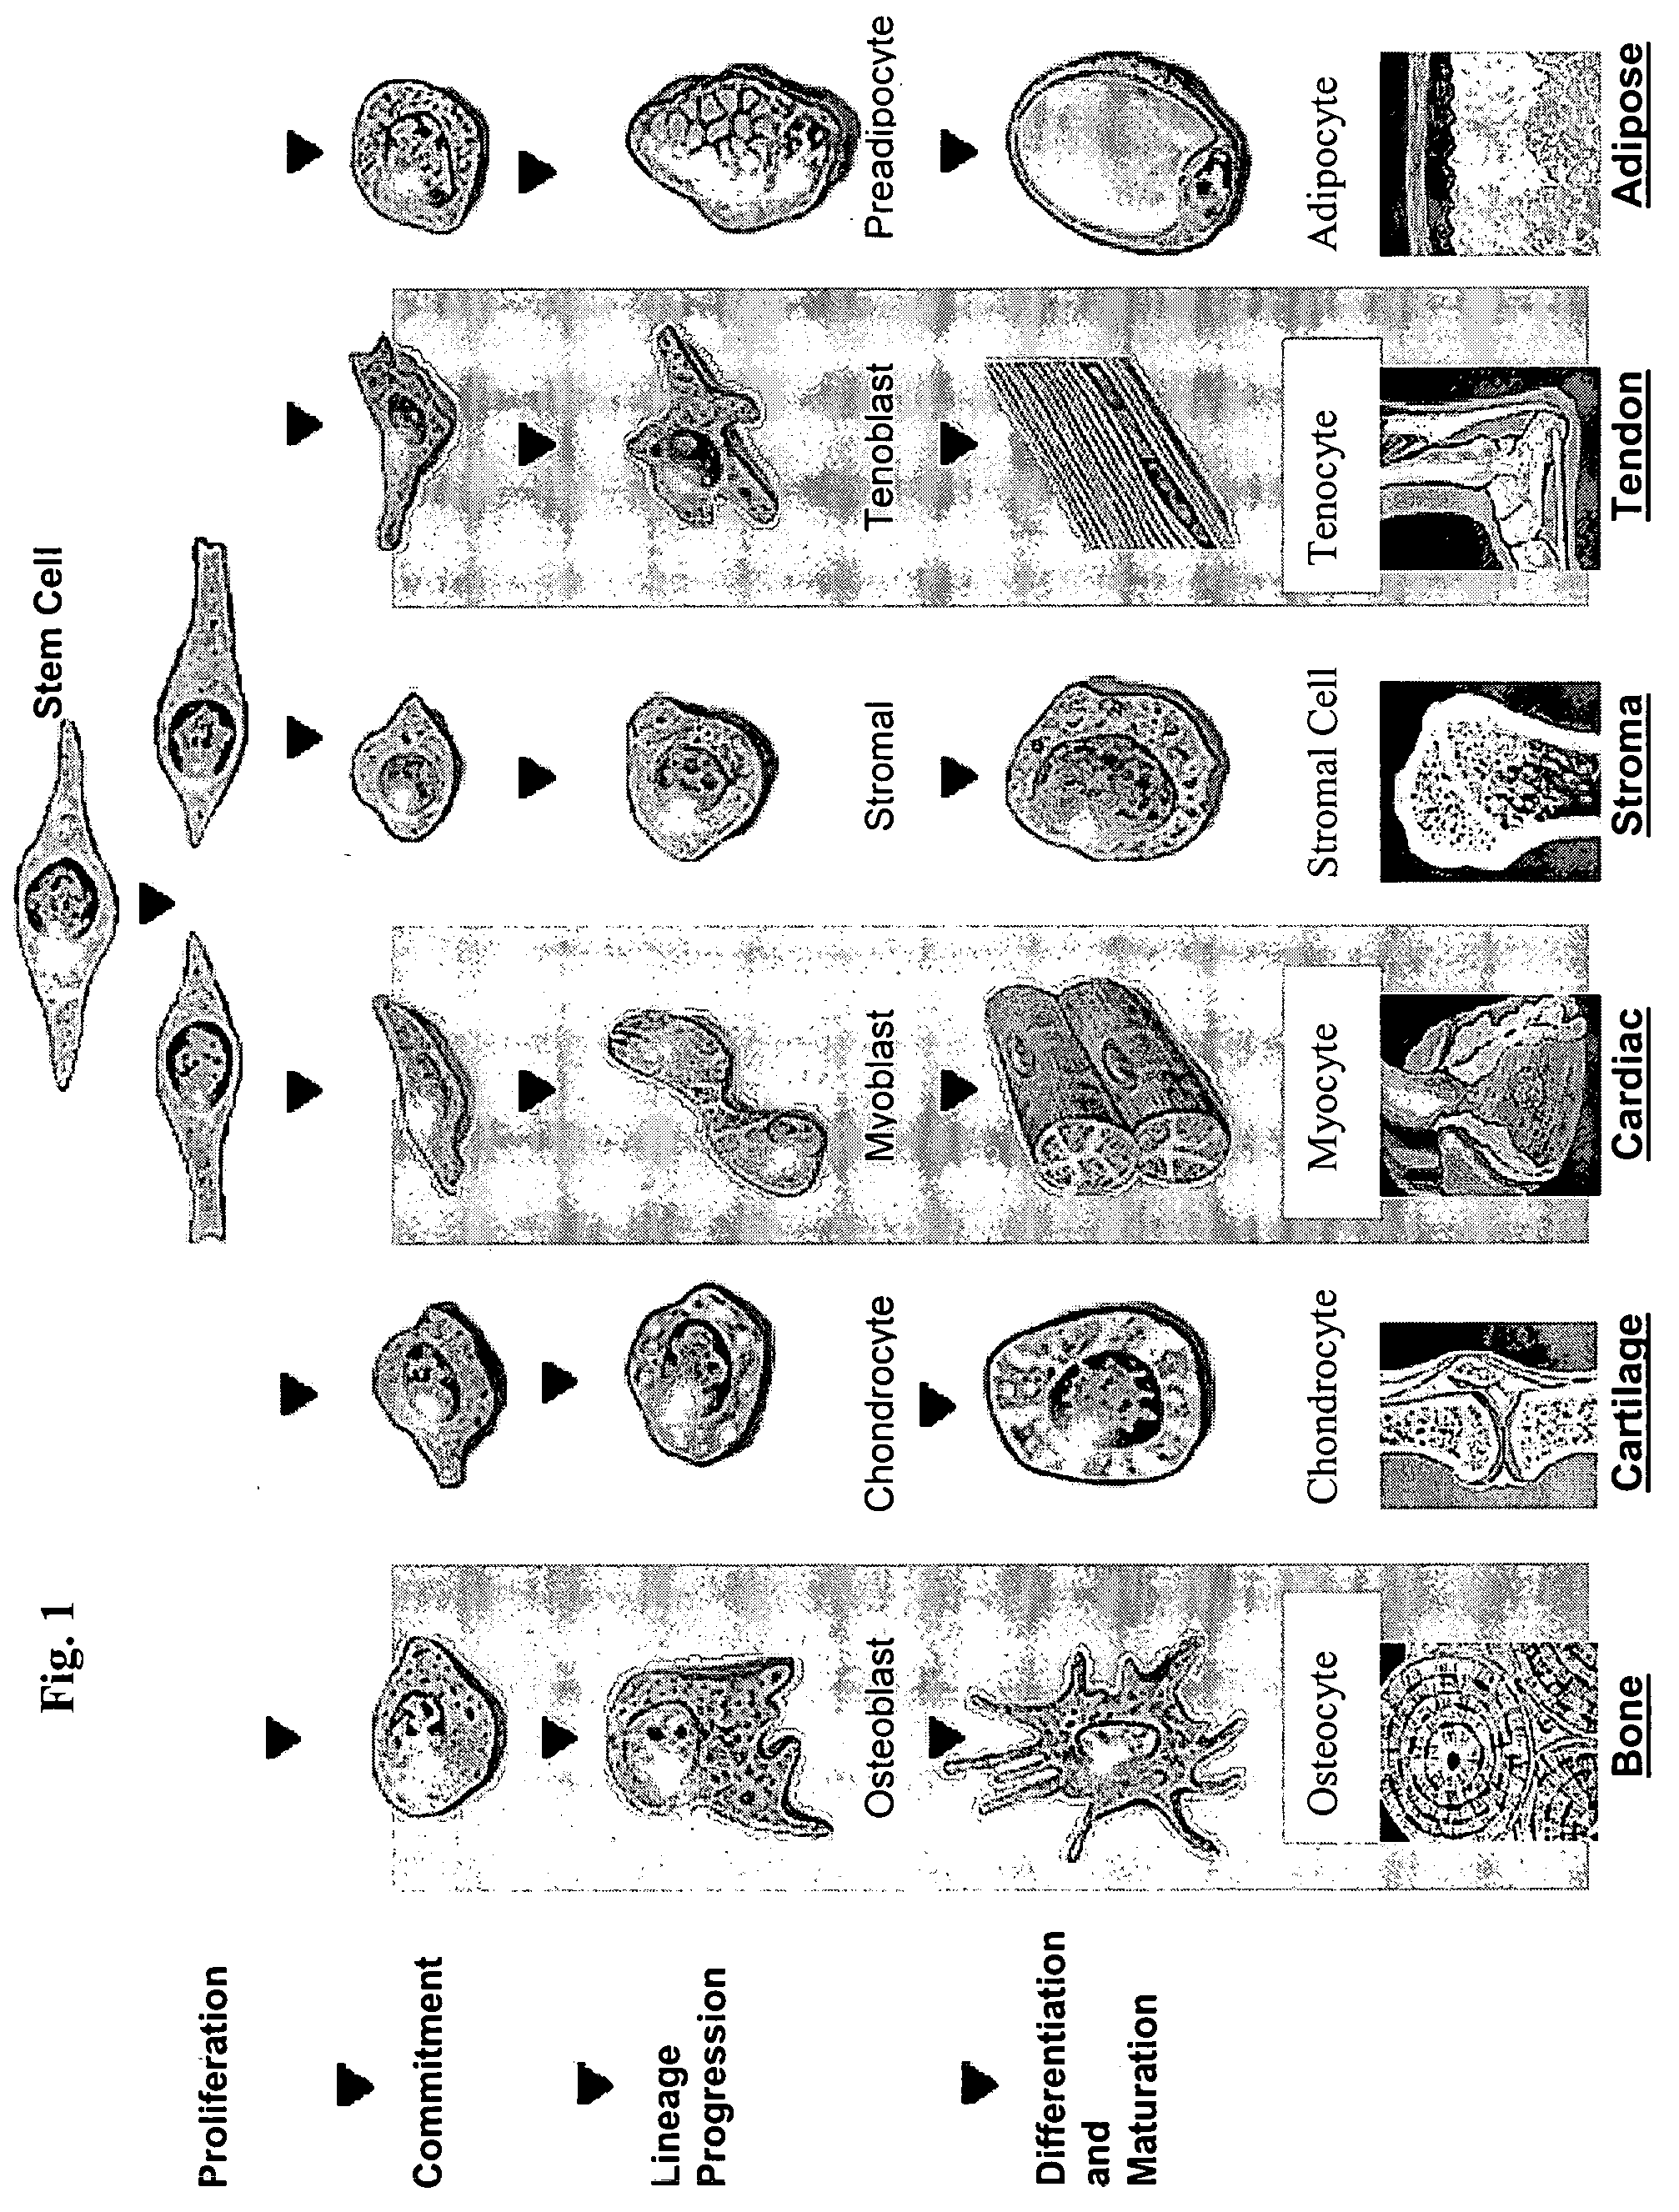 Stem cells for clinical and commercial uses